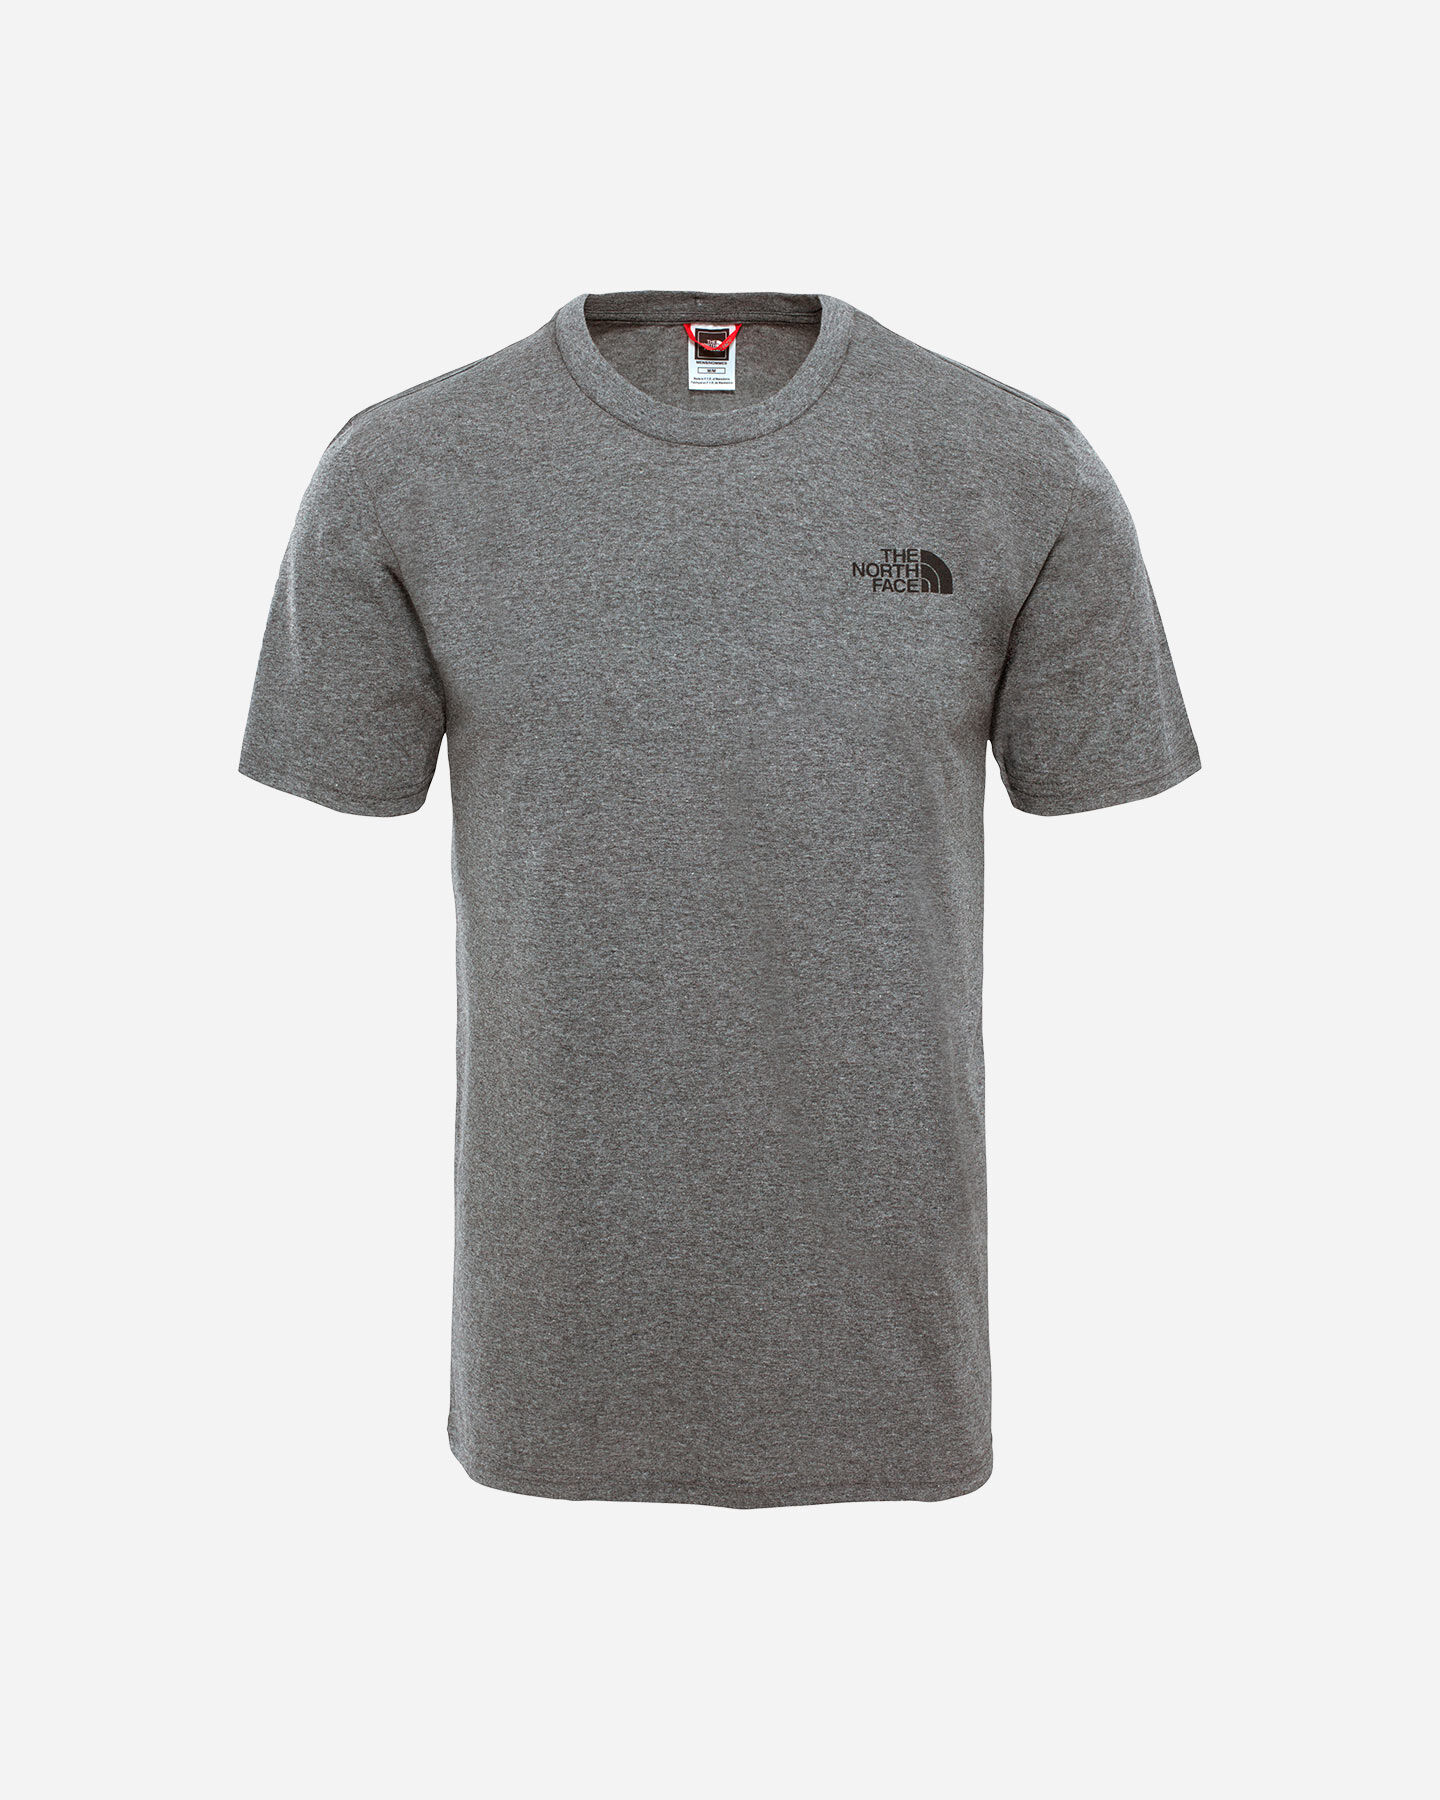  T-Shirt THE NORTH FACE SIMPLE DOME M S5015382|JBV|XXS scatto 0